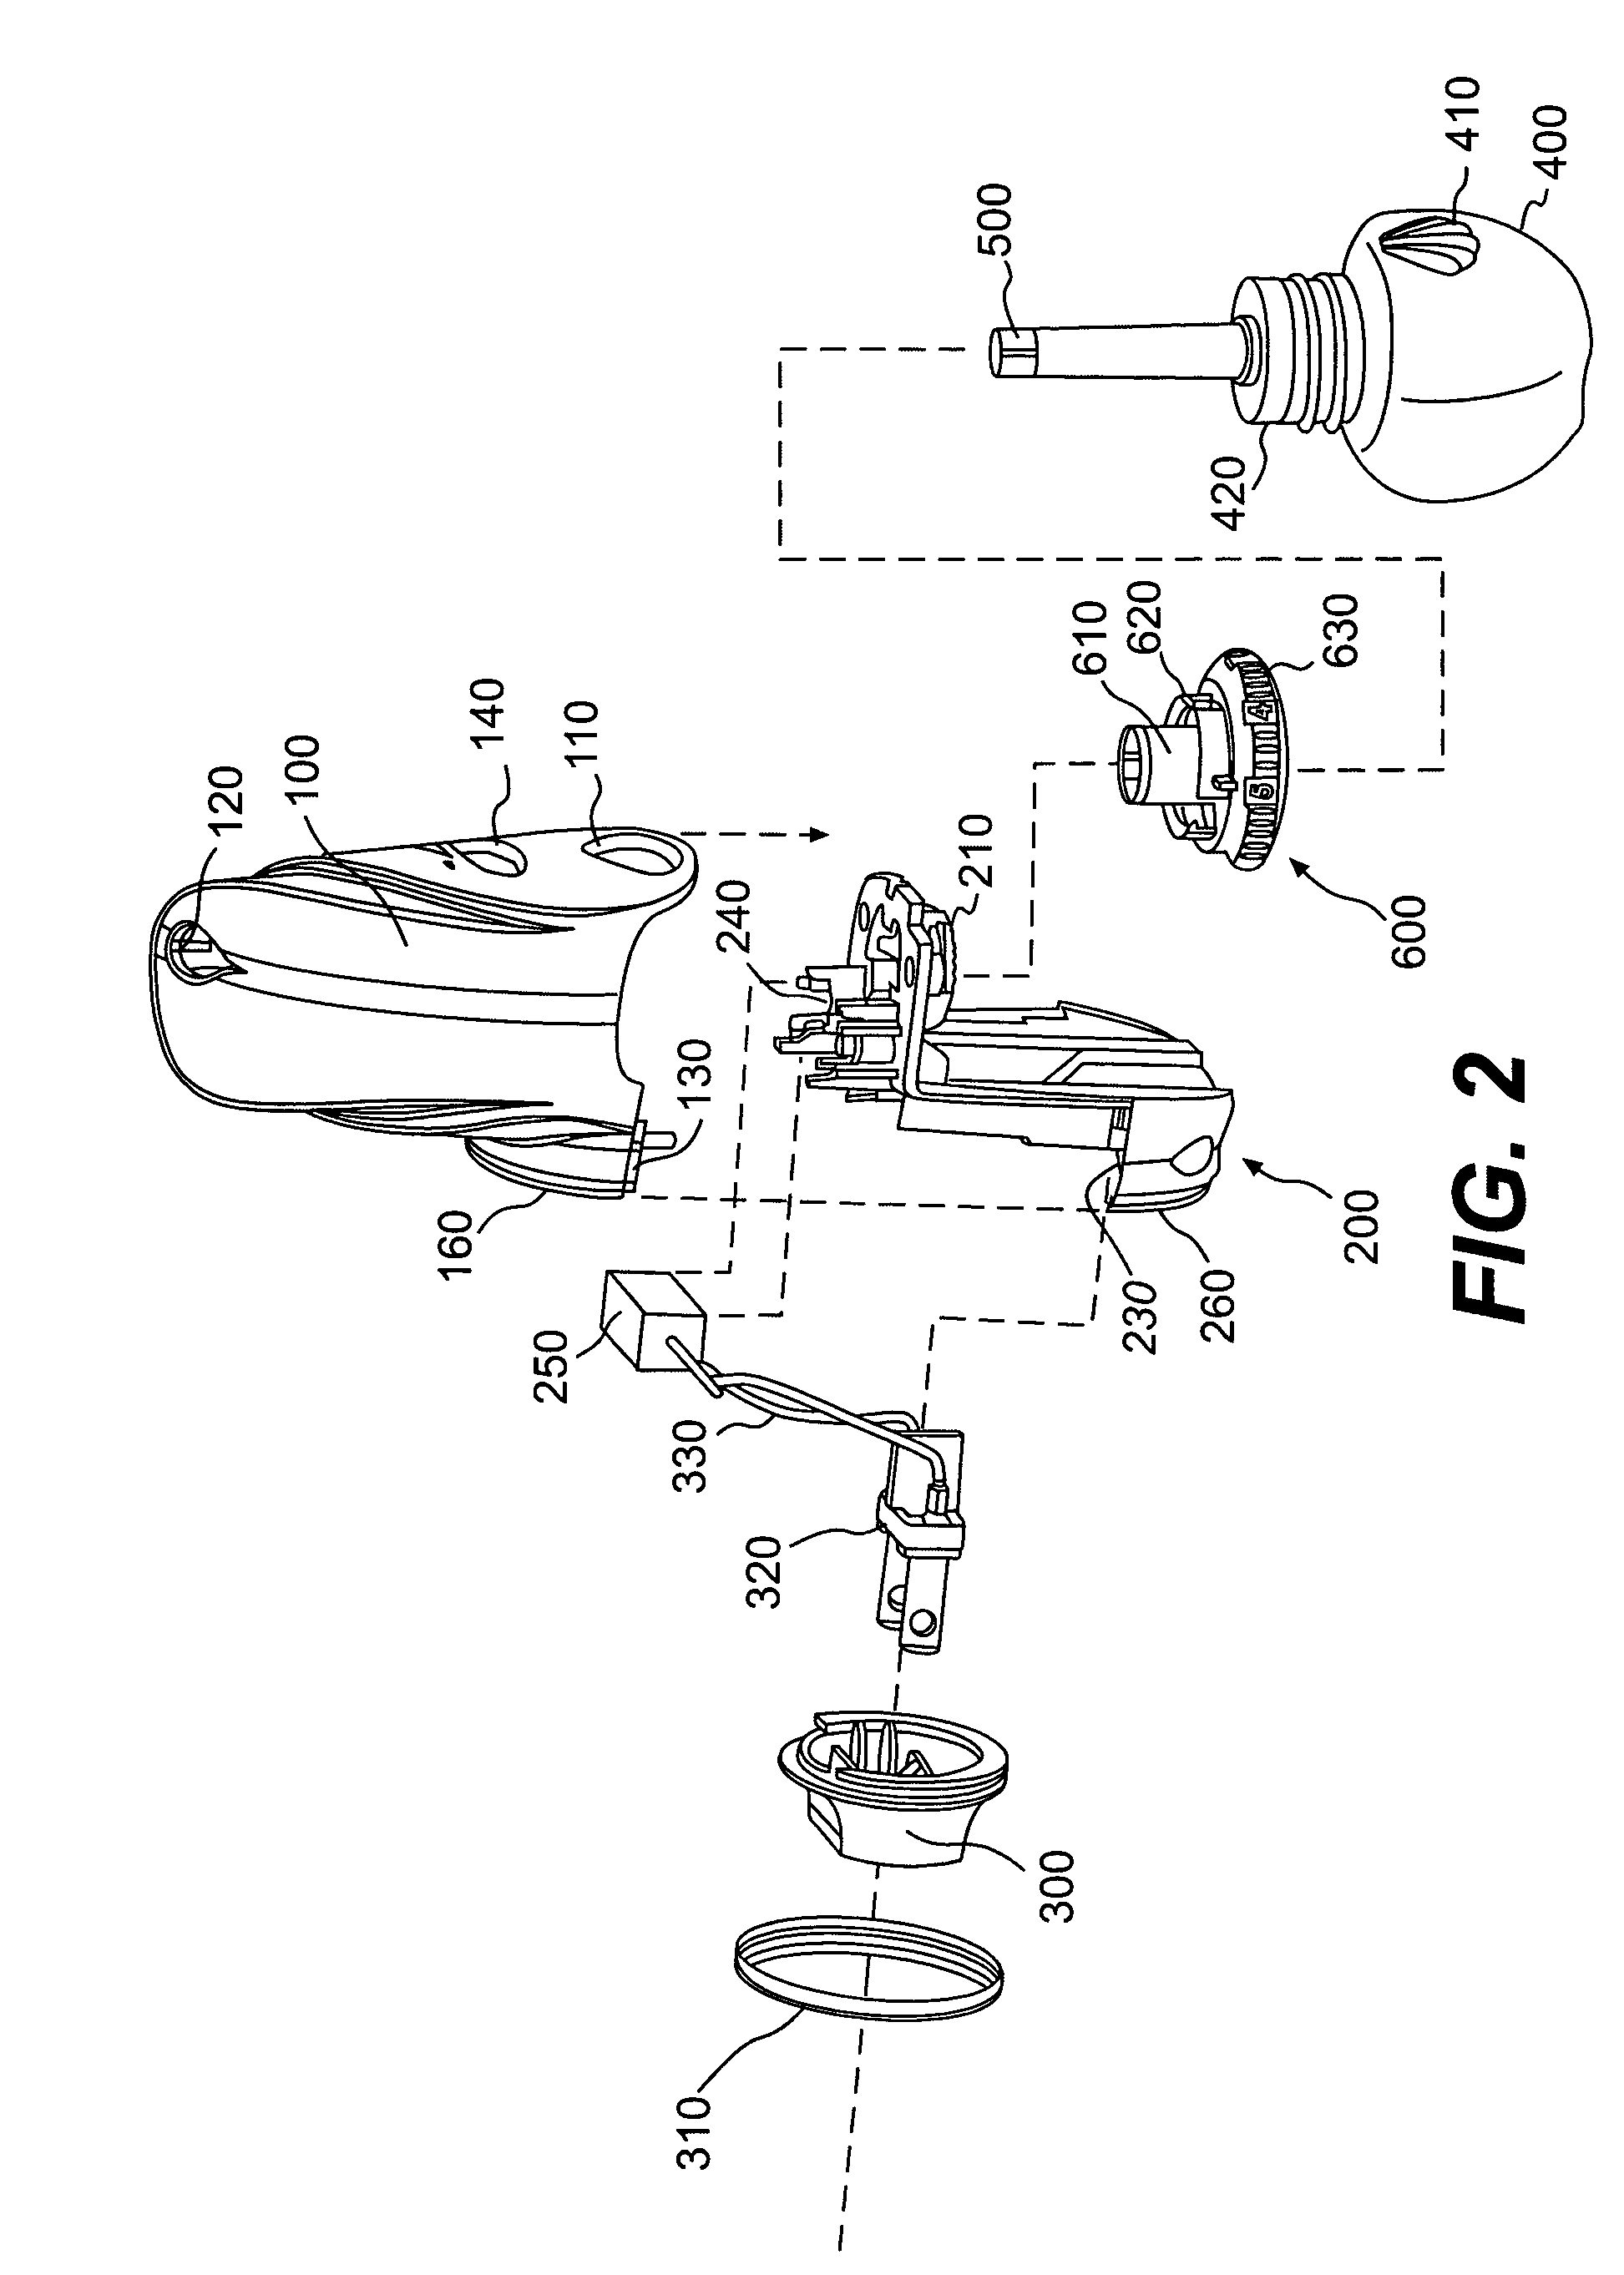 Electrical evaporator with ratcheting wick adjuster